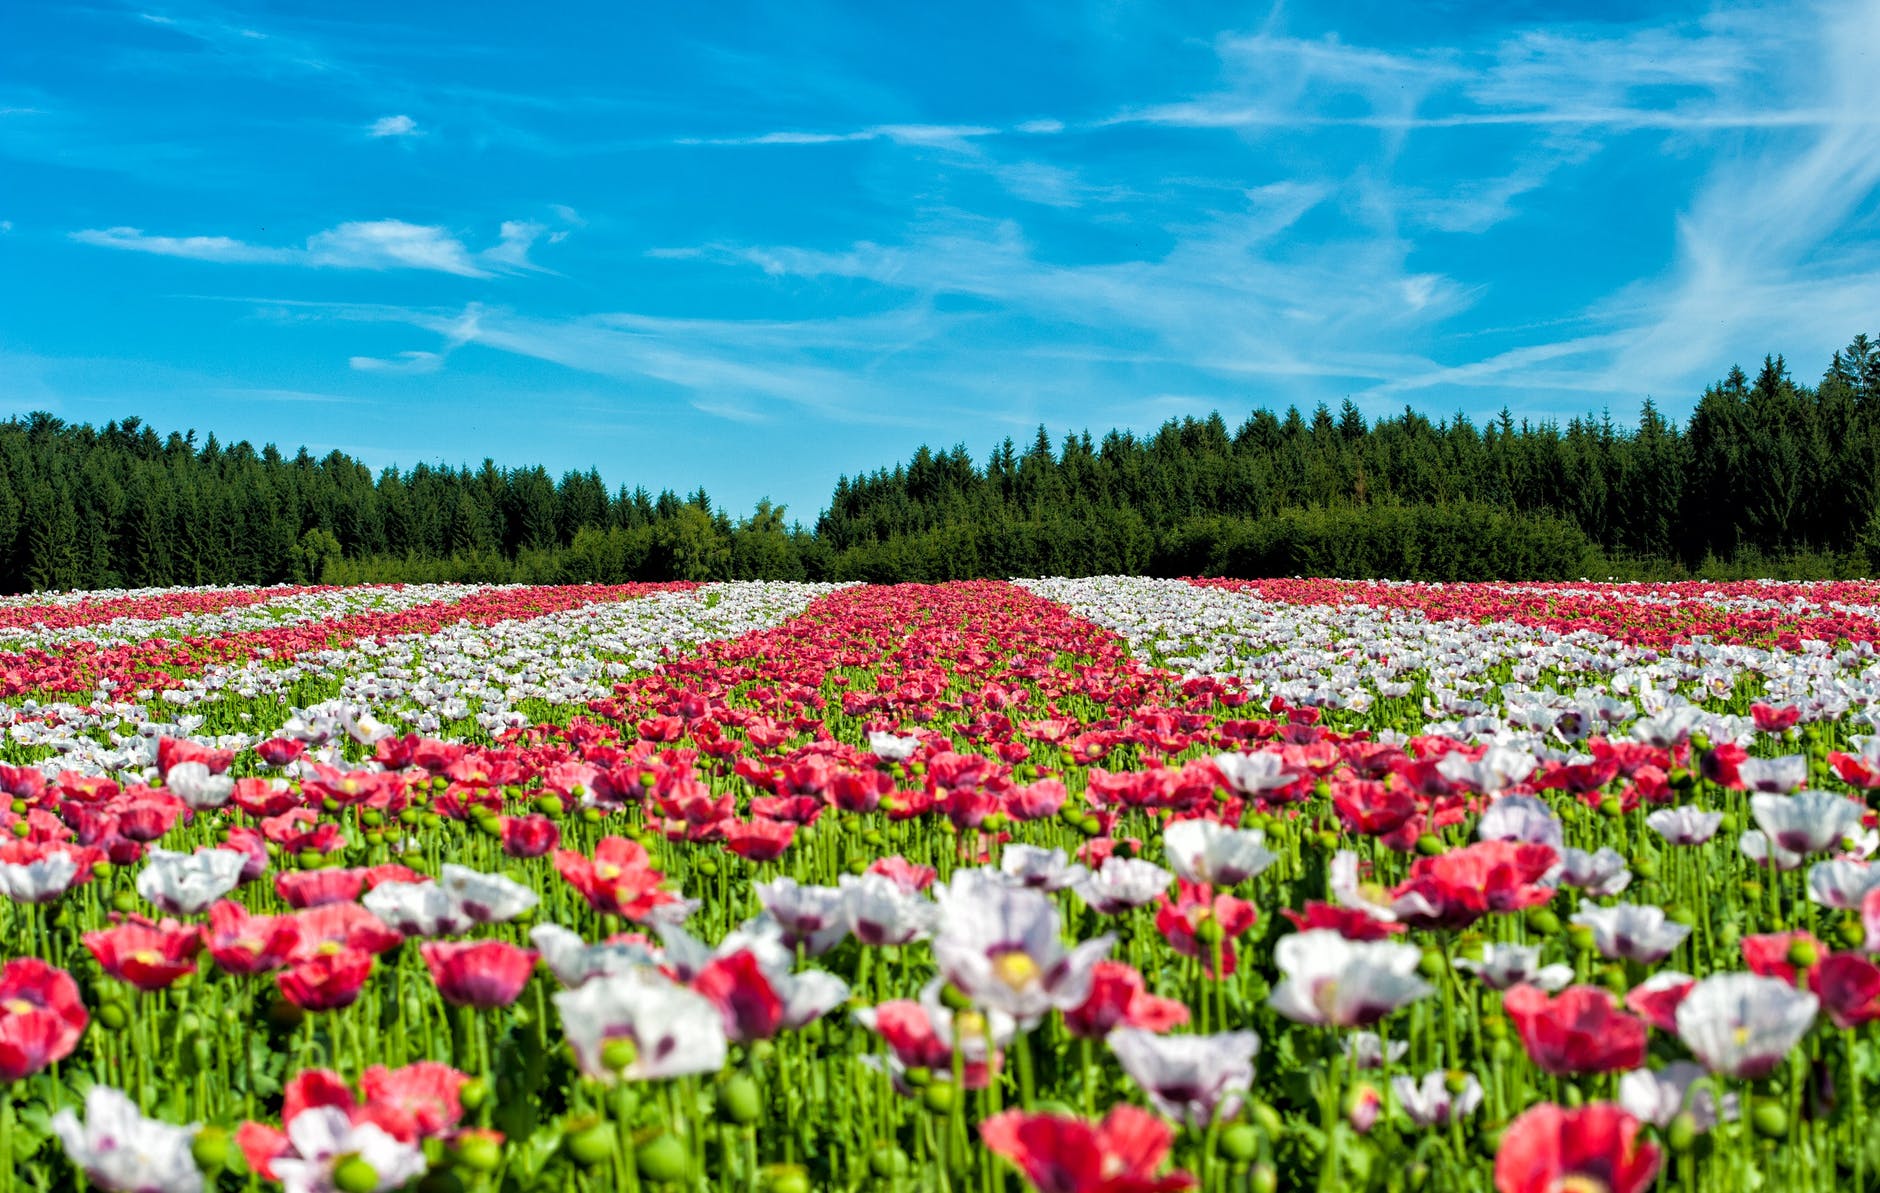 red and white flowers under blue sky during daytime